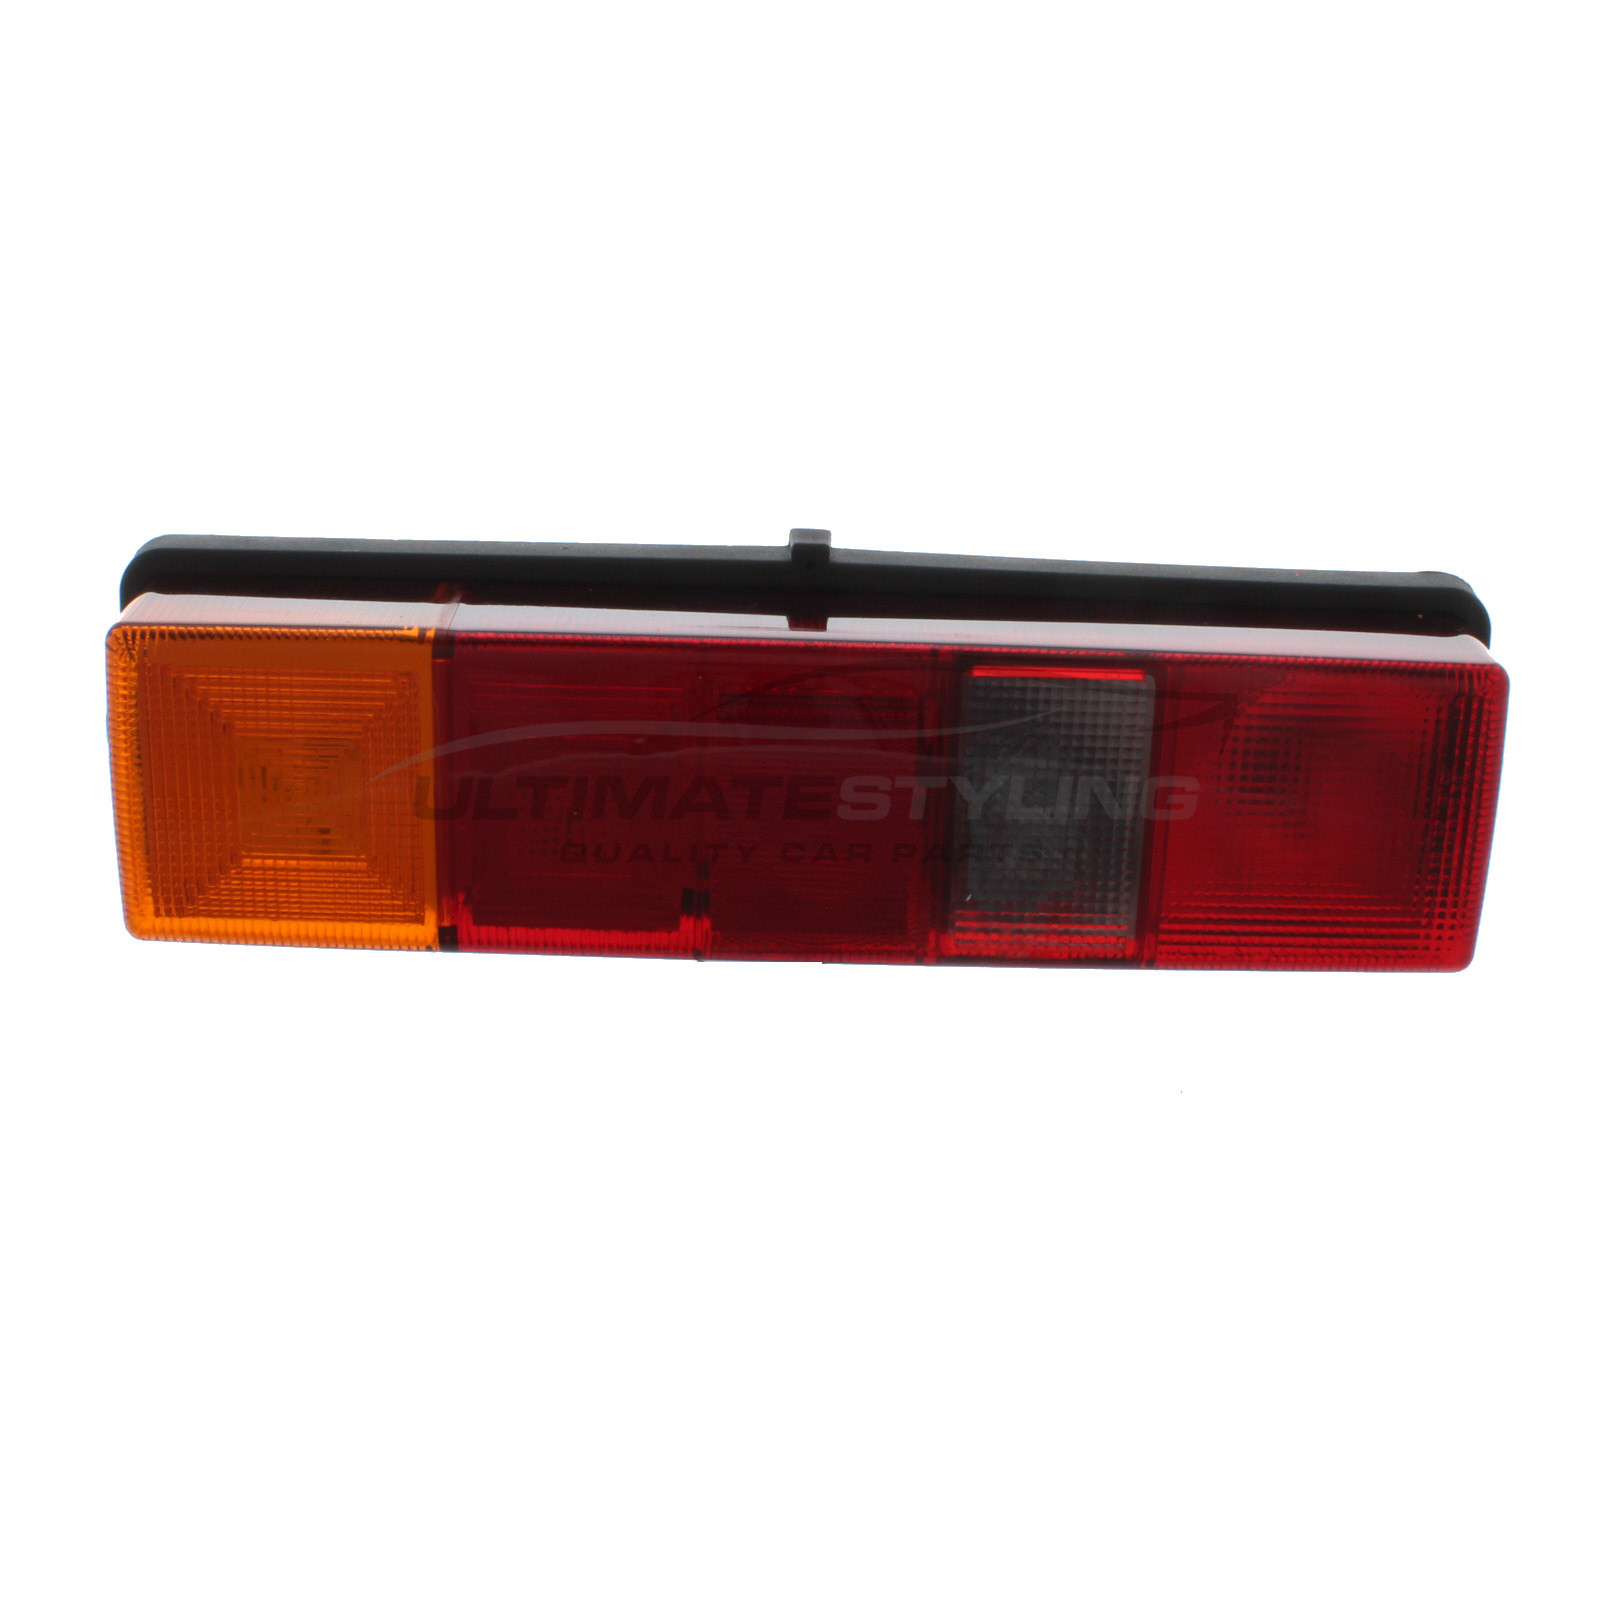 Ford Transit 1985-2014 Non-LED with Amber Indicator Rear Light / Tail Light - Complete Including Bulb Holder Universal (LH or RH)